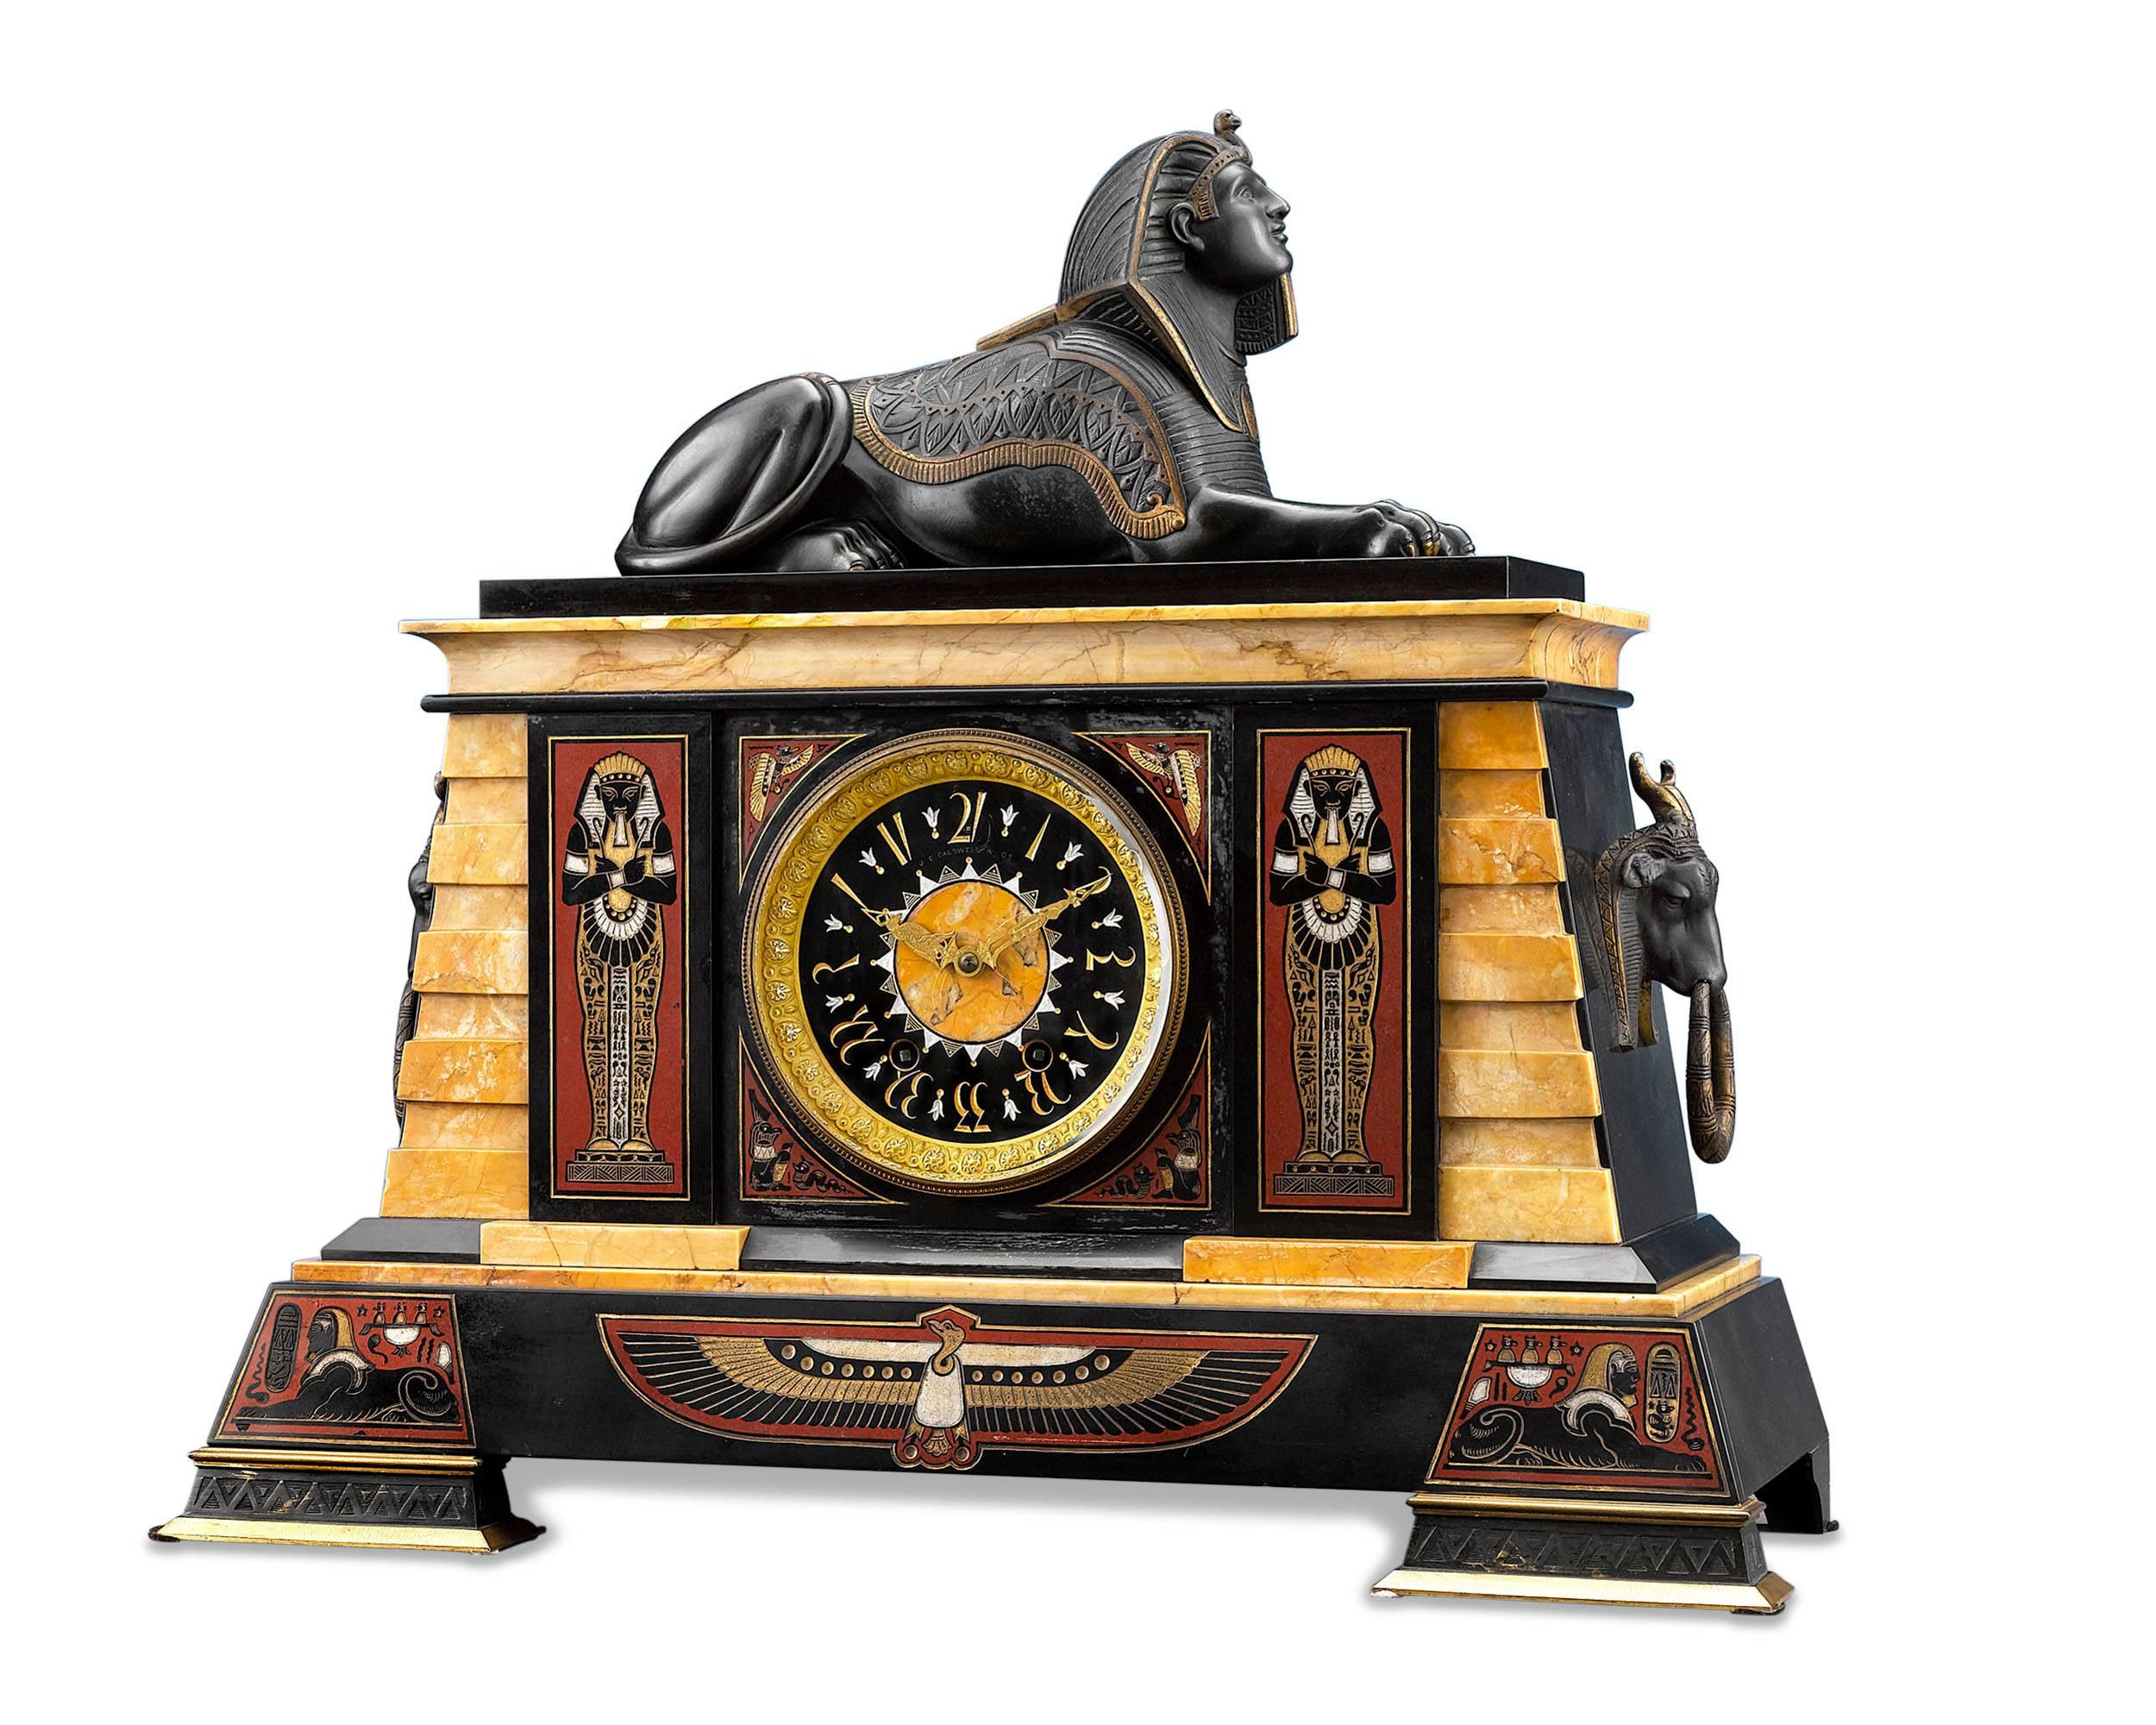 This Egyptian Revival clock garniture by J. E. Caldwell & Co. of Philadelphia is almost identical to the set that is housed in the collection of the Metropolitan Museum of Art. Composed of a clock and two obelisks, this garniture is crafted of